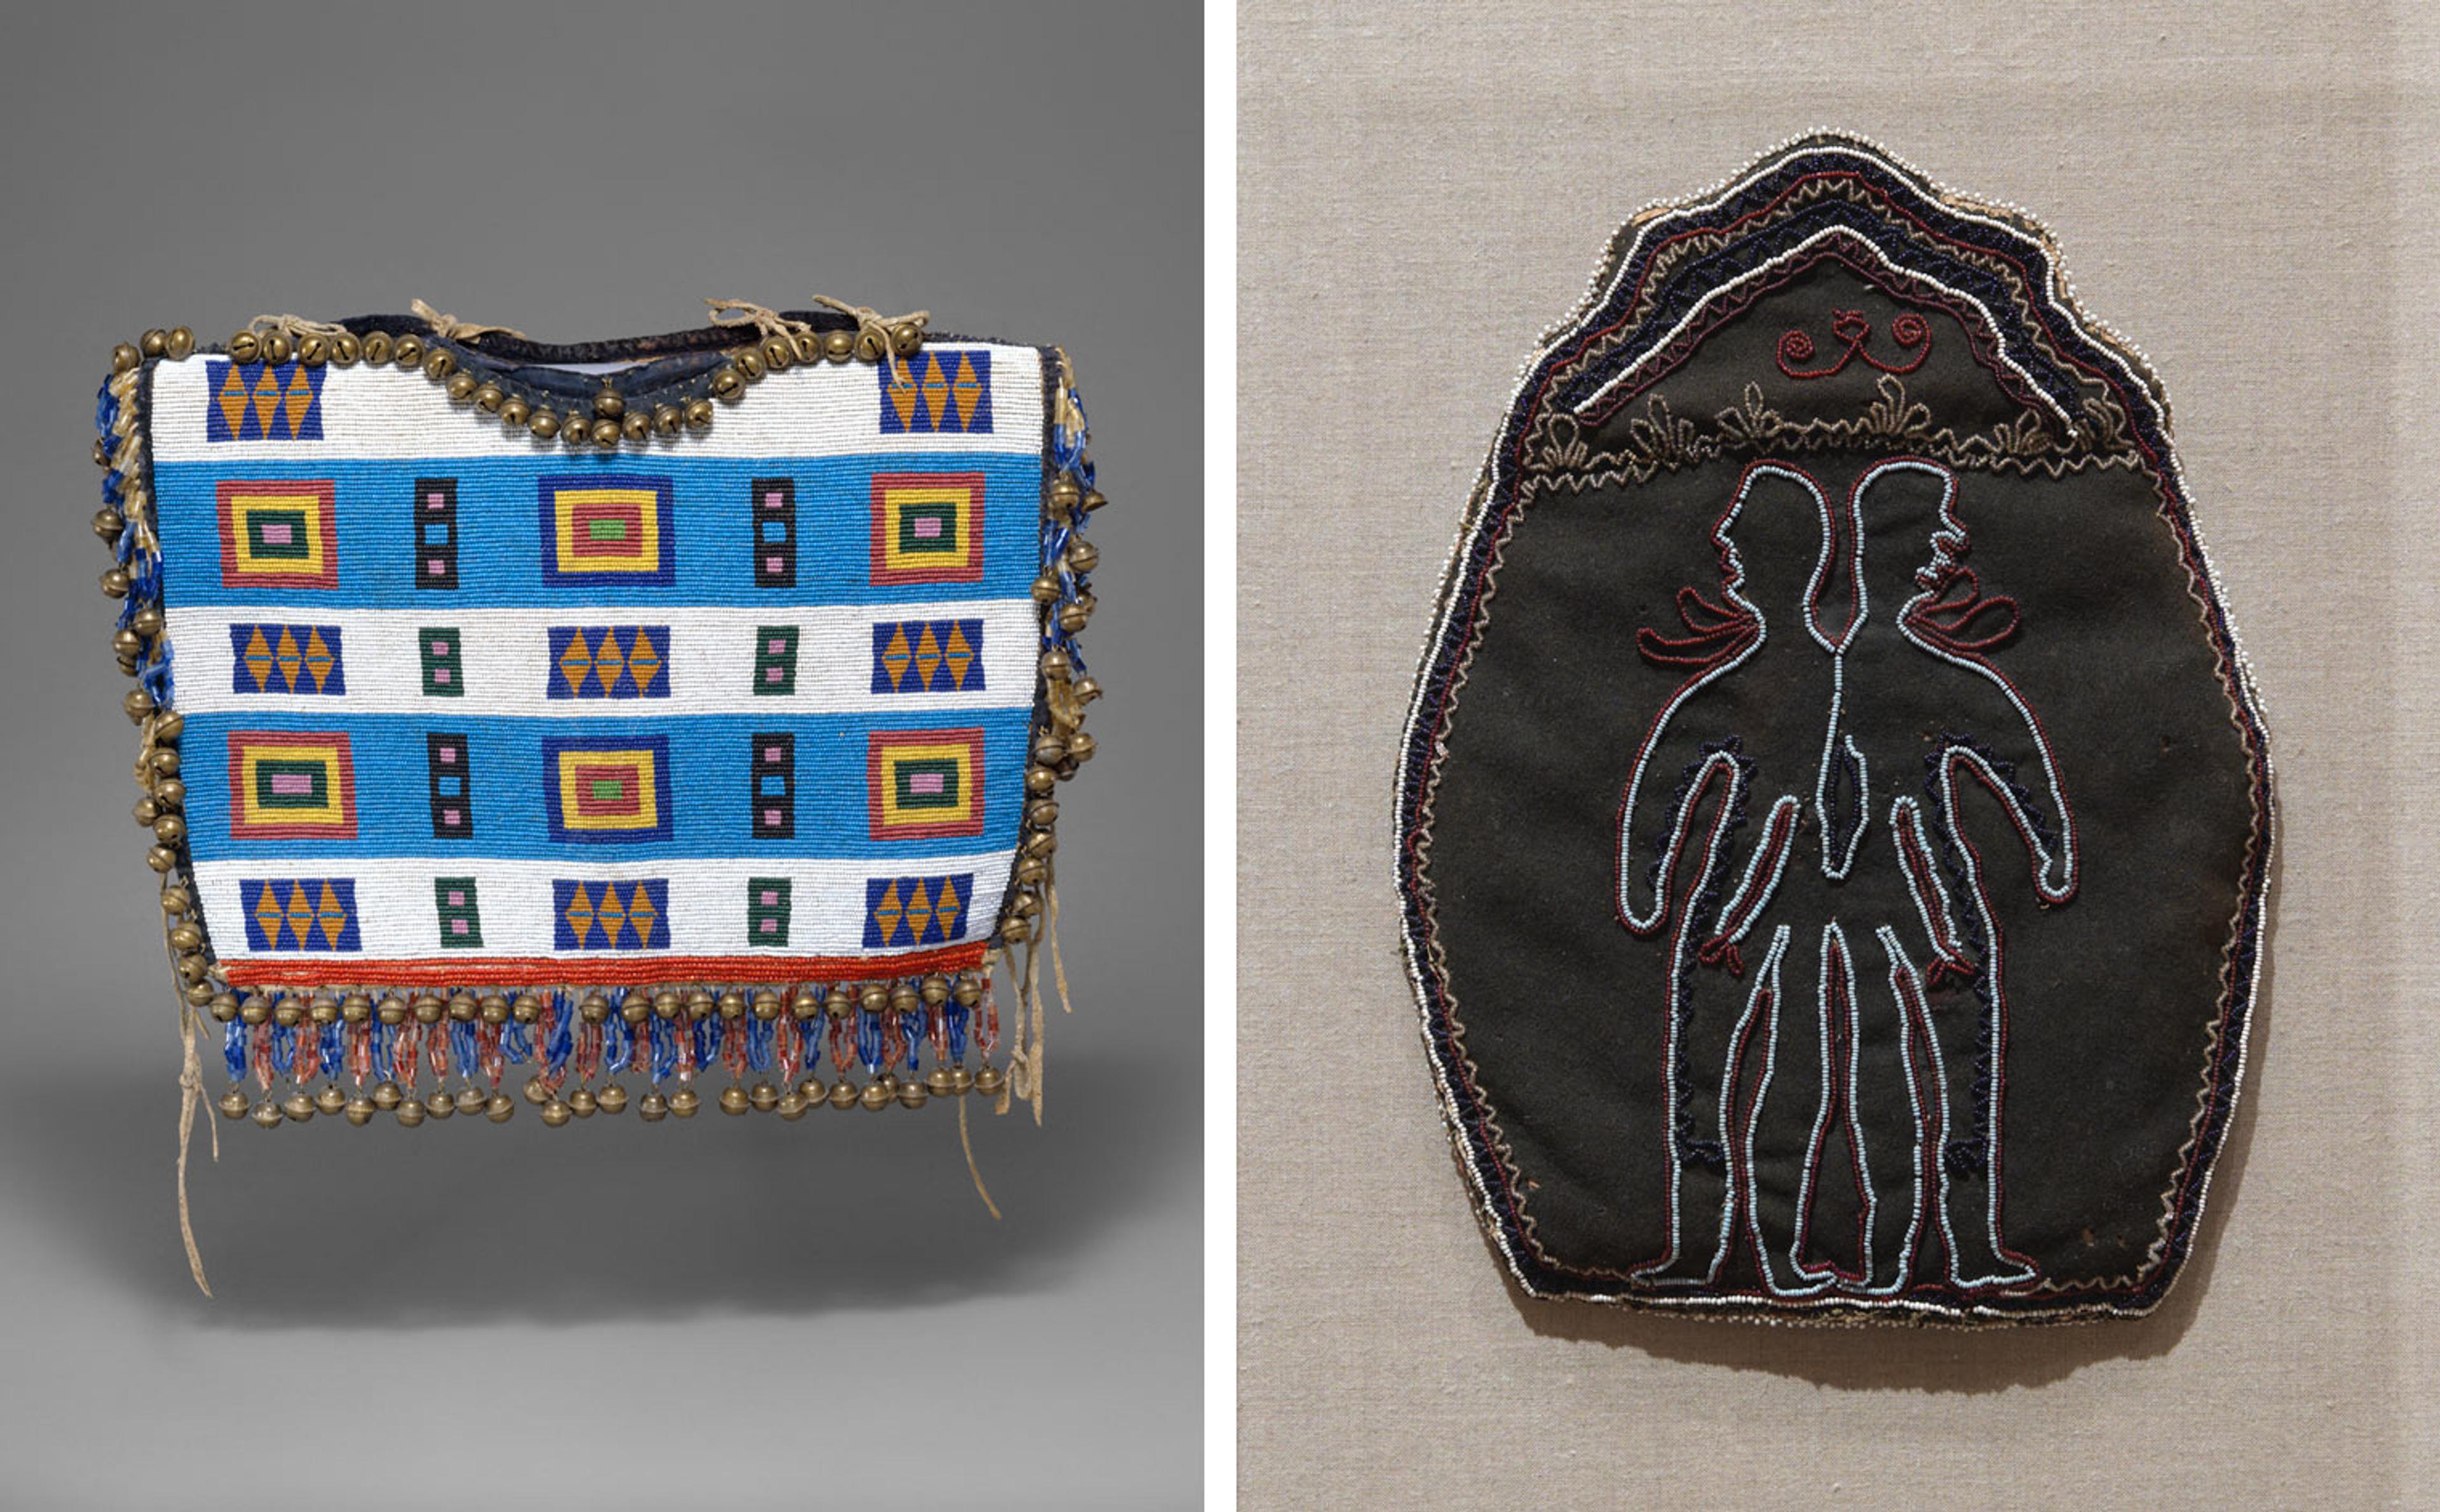 At left, a girl's cape made by the Stoney tribe of Canada in the late nineteenth century; at right, a Native American pouch from the early nineteenth century made by the Haudenosaunee/ Iroquois tribes